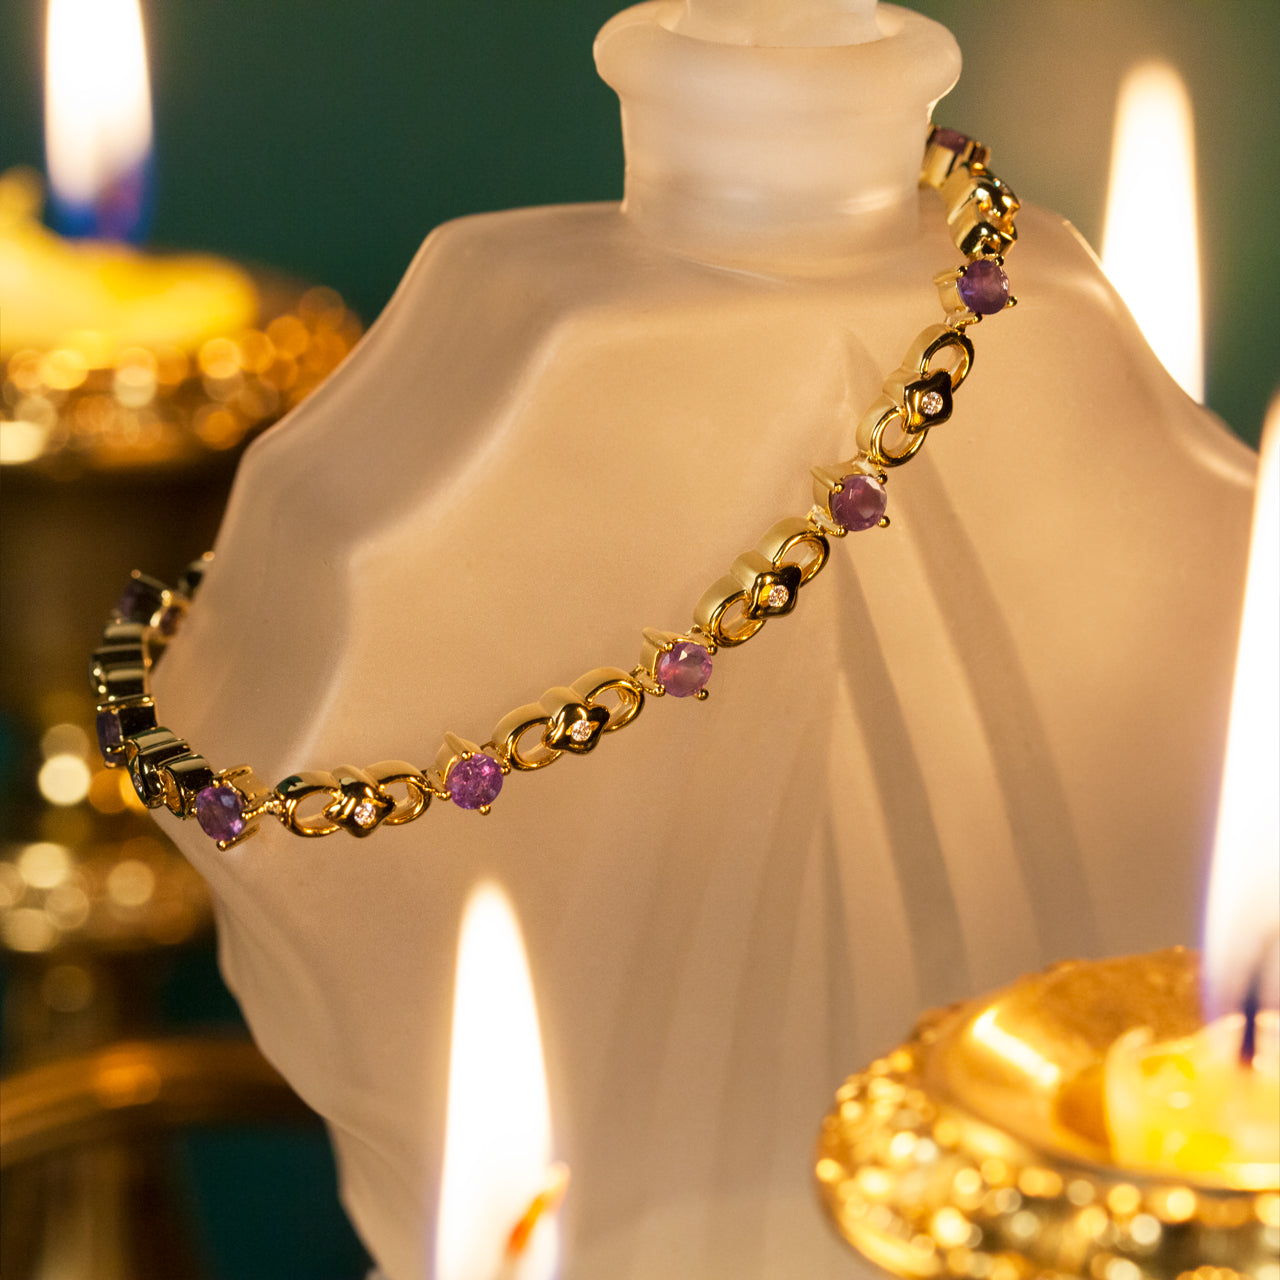 The 3.00ctw natural alexandrite 18k yellow gold bracelet elegantly presented next to a lit candle and decorative bottle